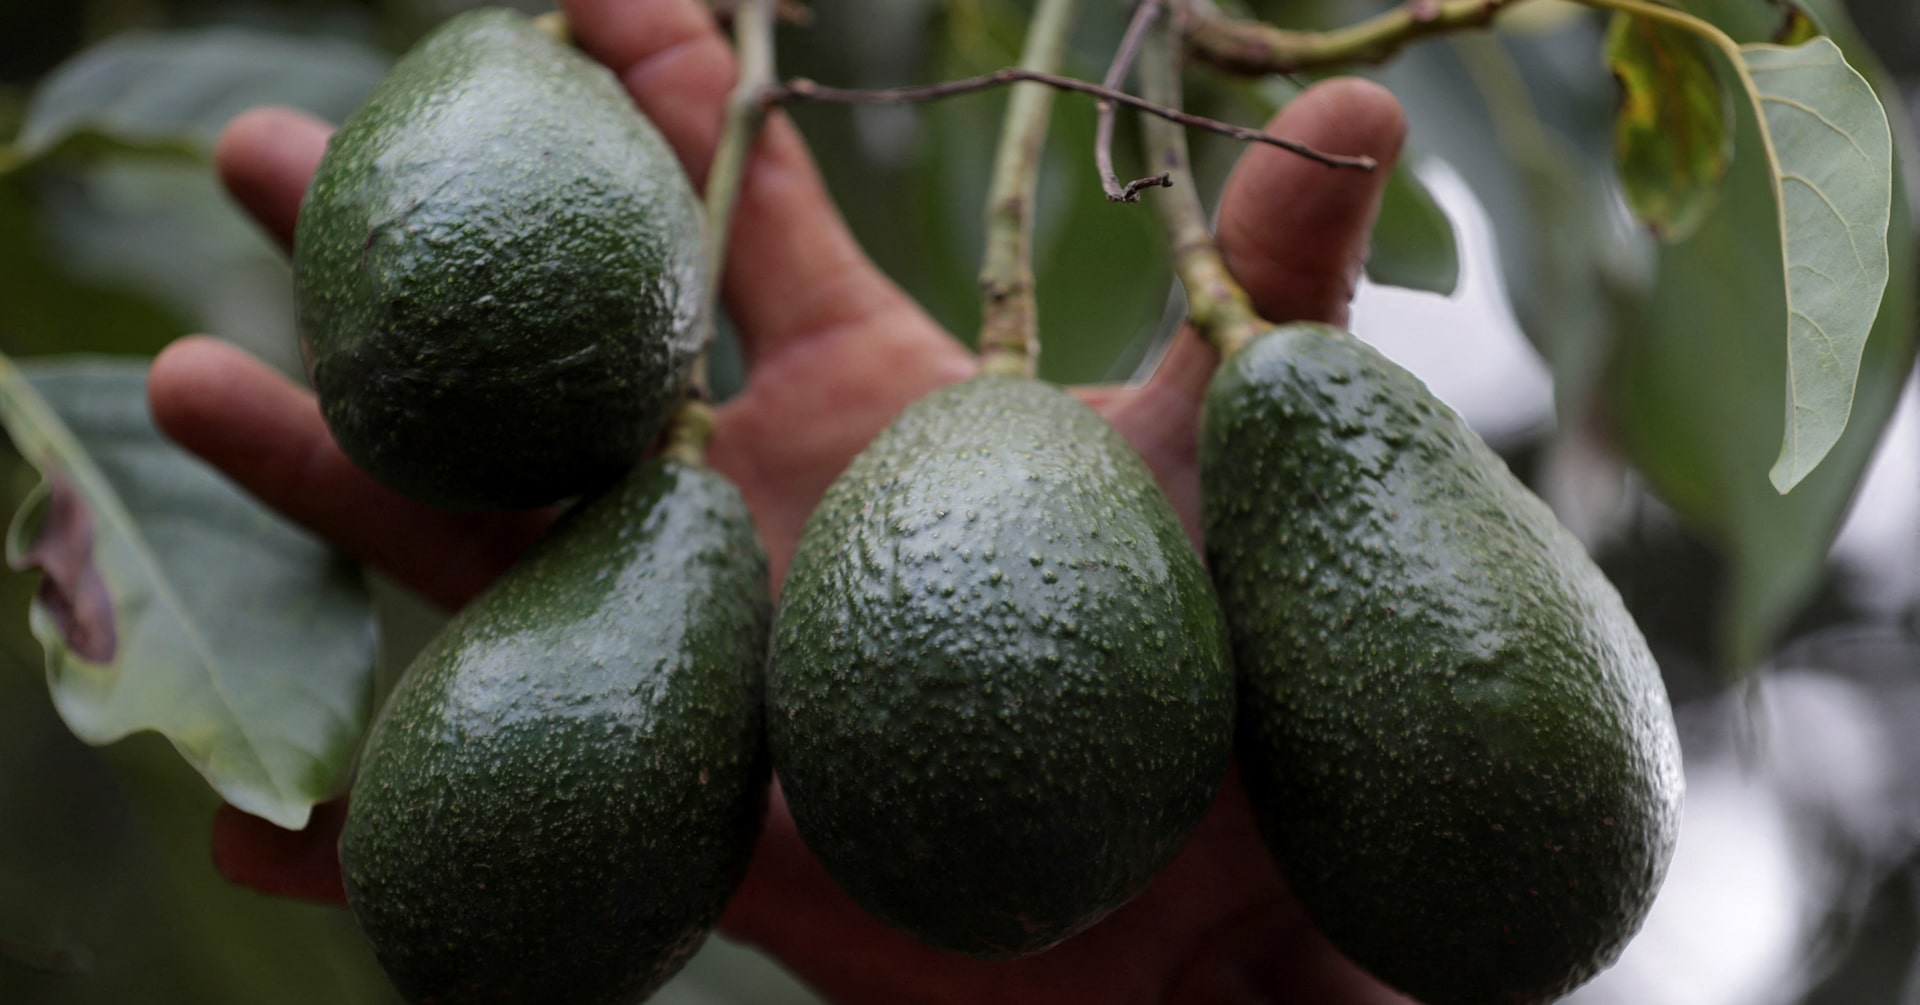 Mexico foreign ministry to speak with U.S. to end avocado conflict, president says